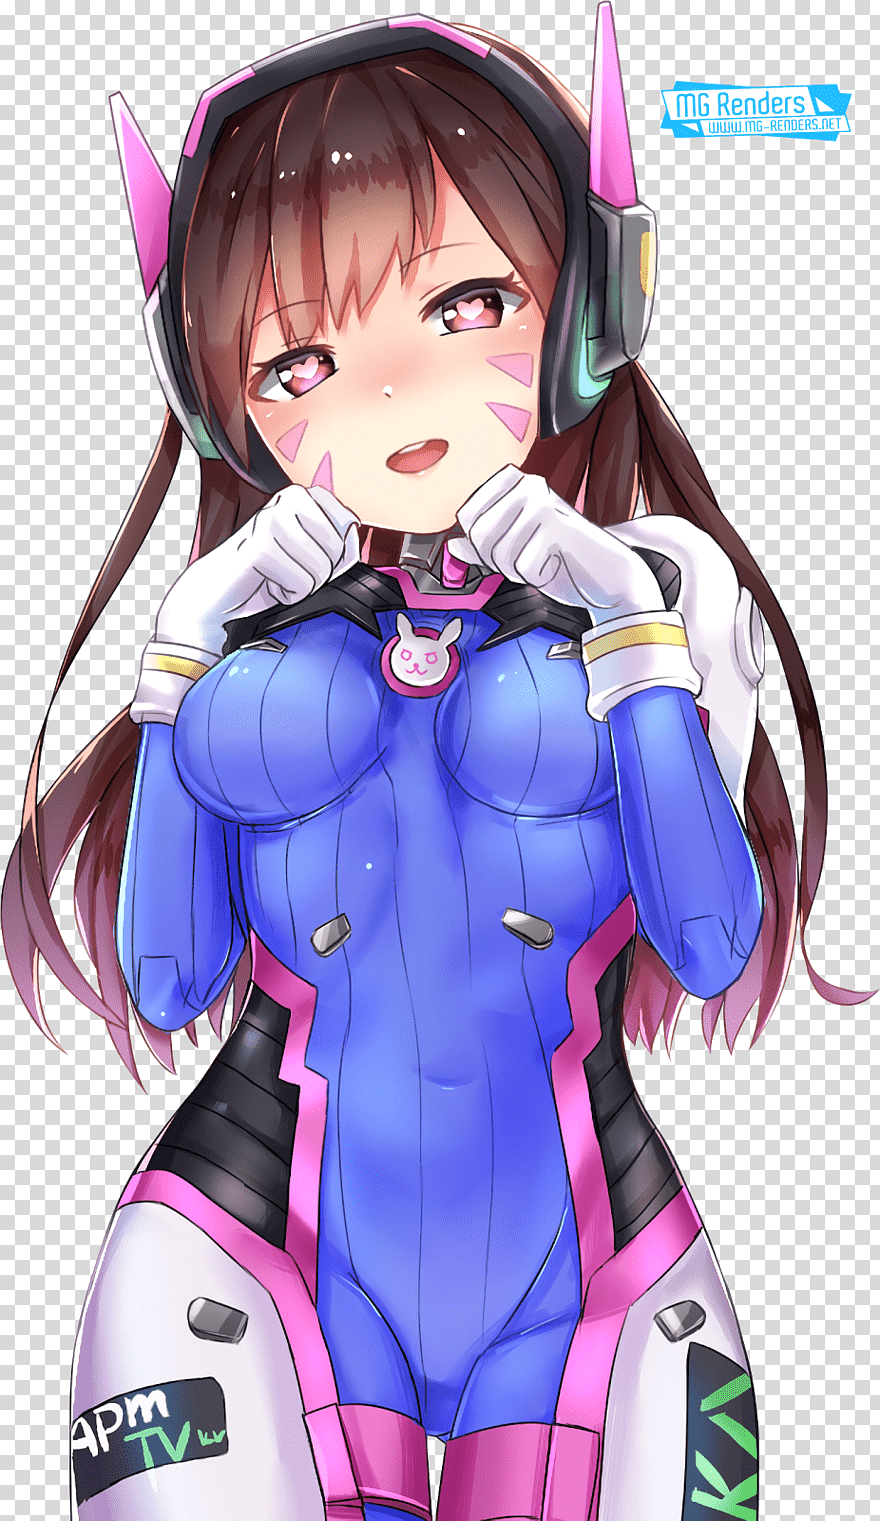 Overwatch D.Va Anime Tracer Mei, Anime, video Game, fictional